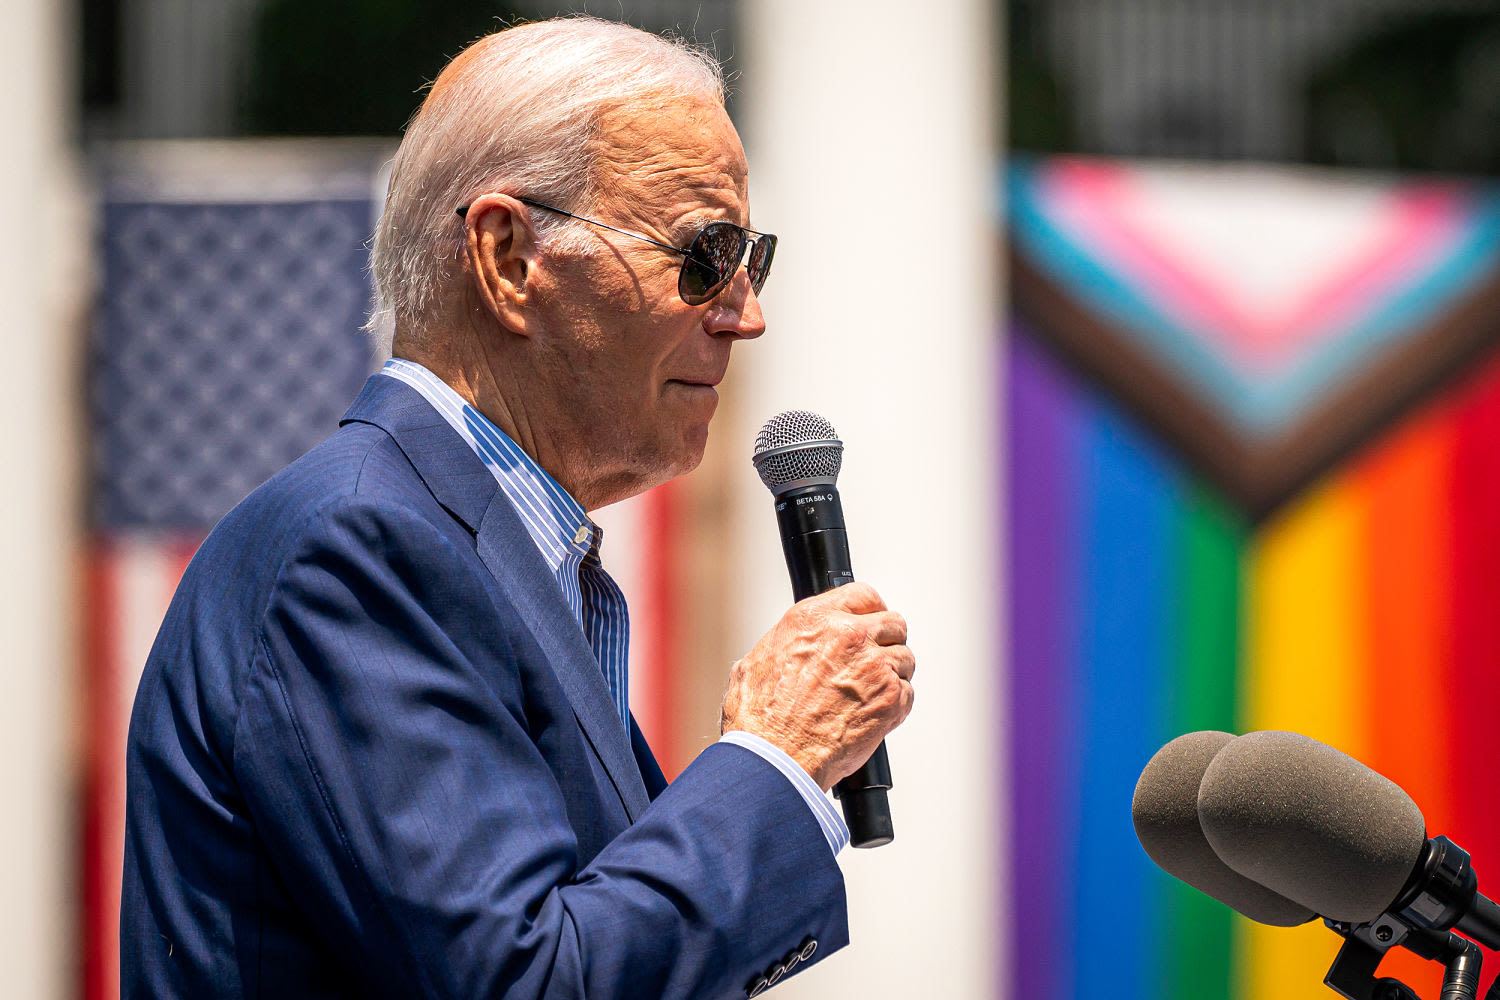 America's largest LGBTQ rights group plans $15 million swing state blitz to re-elect Biden